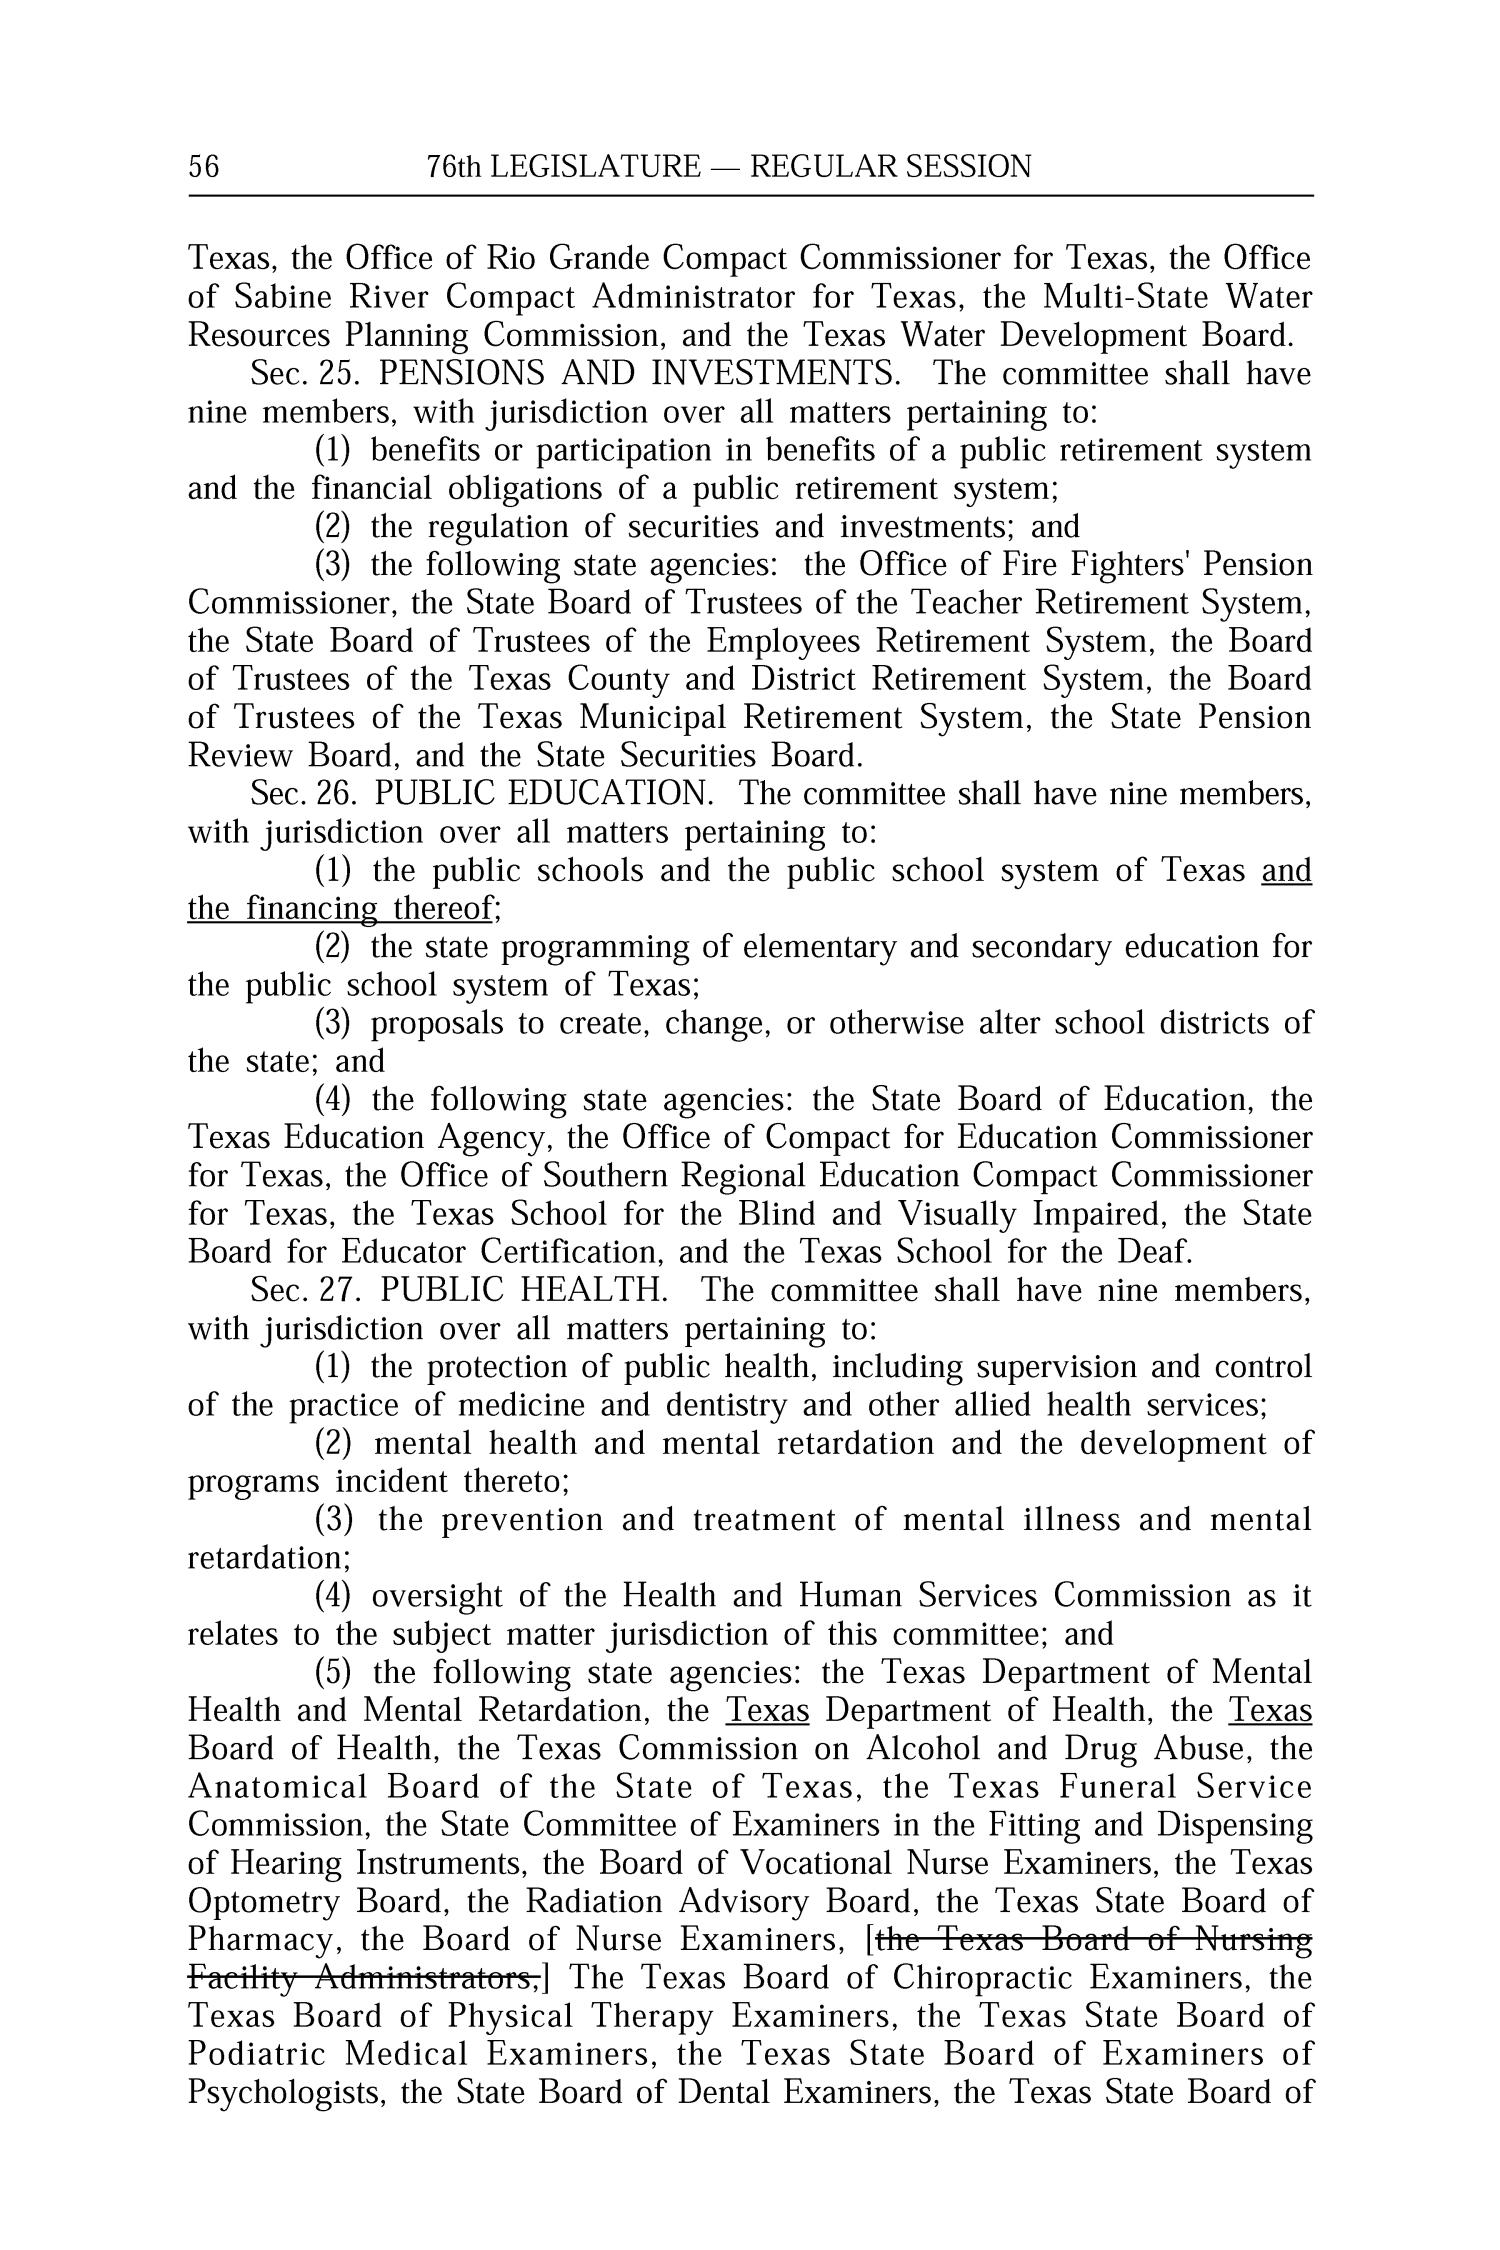 Journal of the House of Representatives of the Regular Session of the Seventy-Sixth Legislature of the State of Texas, Volume 1
                                                
                                                    56
                                                